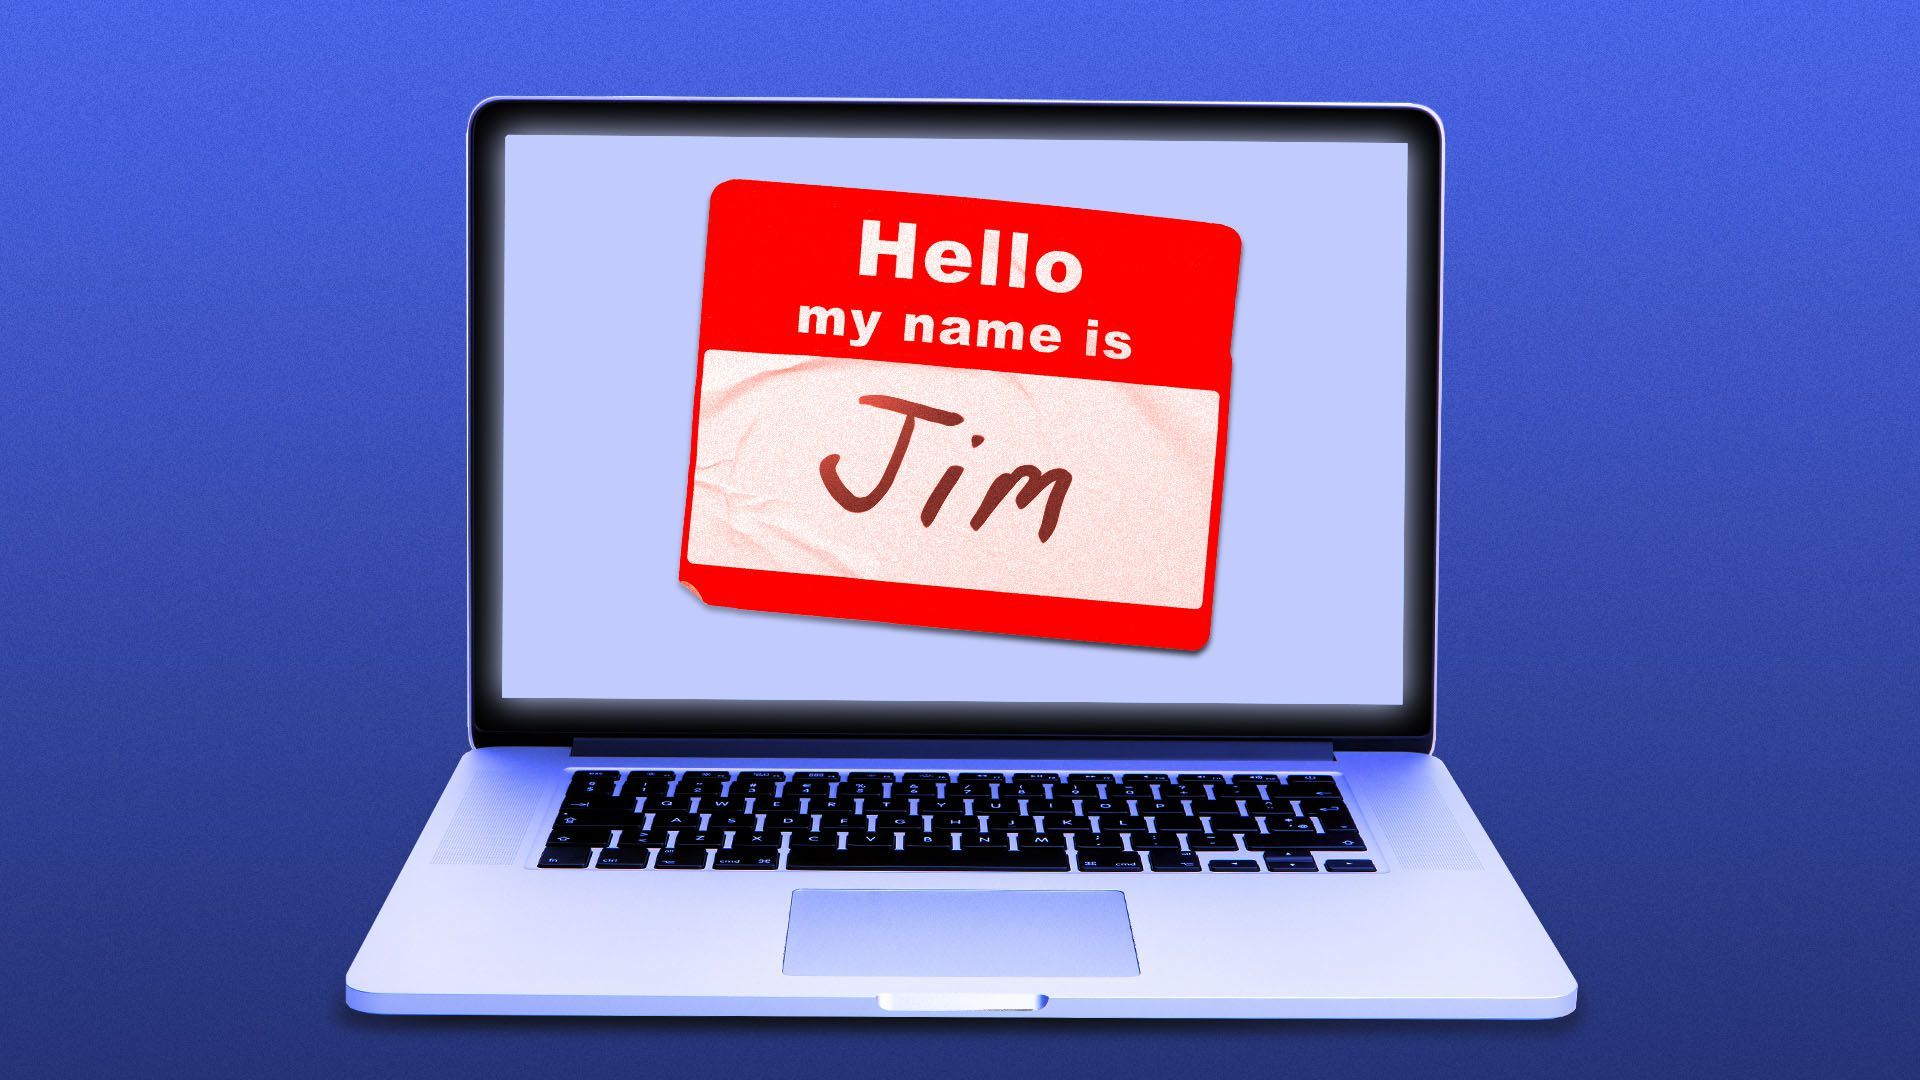 Illustration of a laptop with a sticker on the screen that reads "Hello my name is Jim"